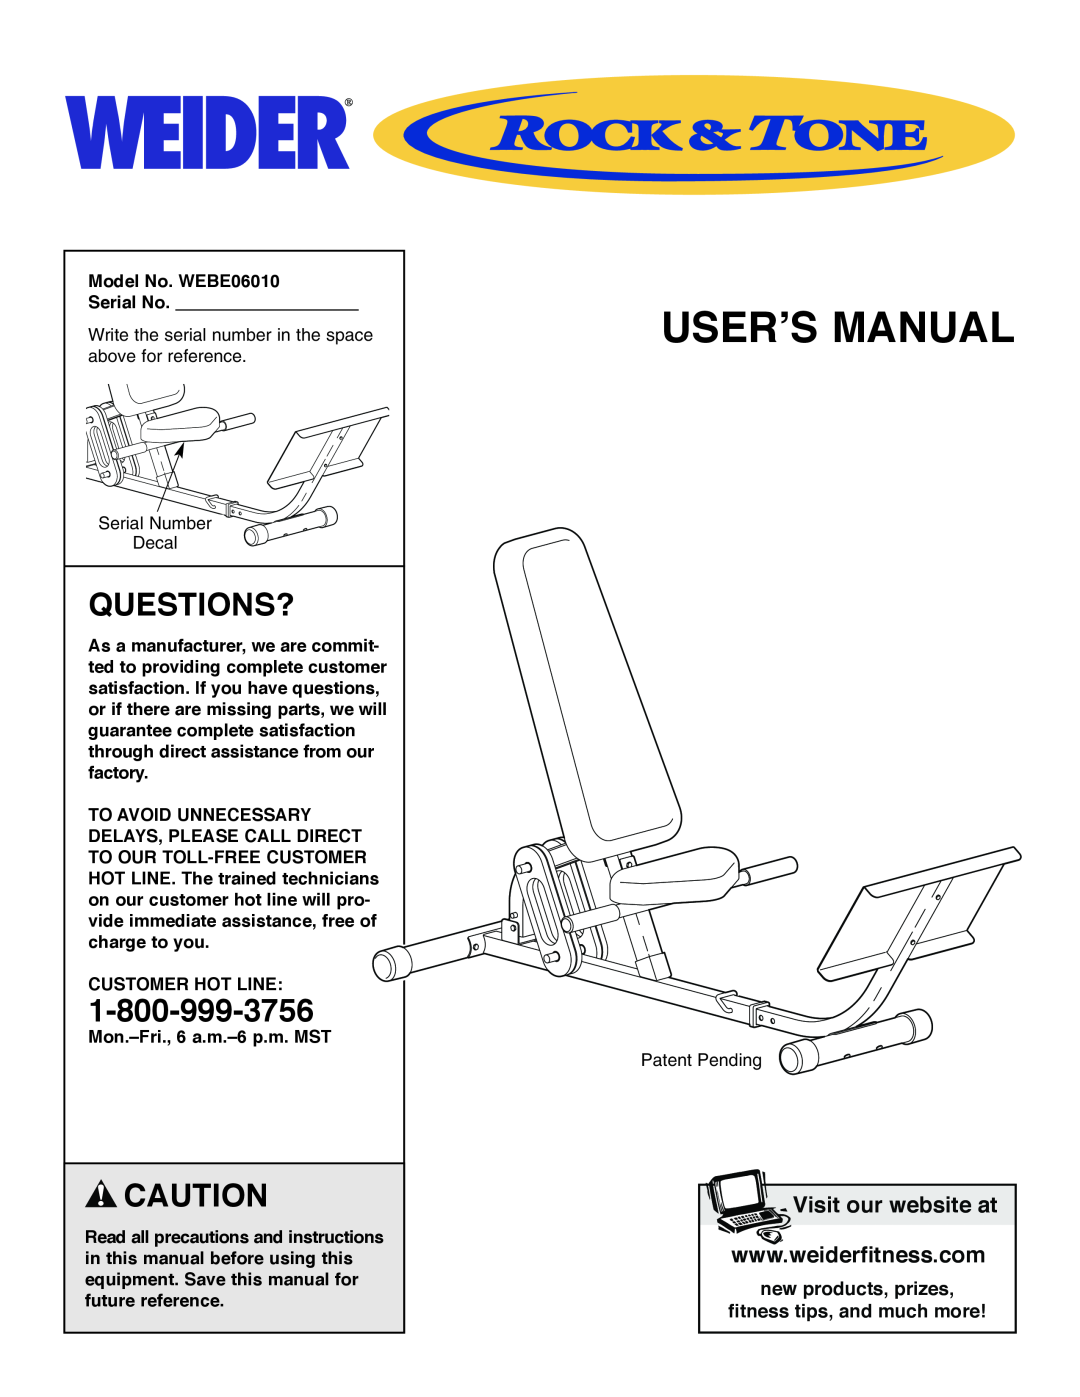 Weider user manual User’S Manual, Questions?, Visit our website at, Model No. WEBE06010 Serial No, Customer Hot Line 